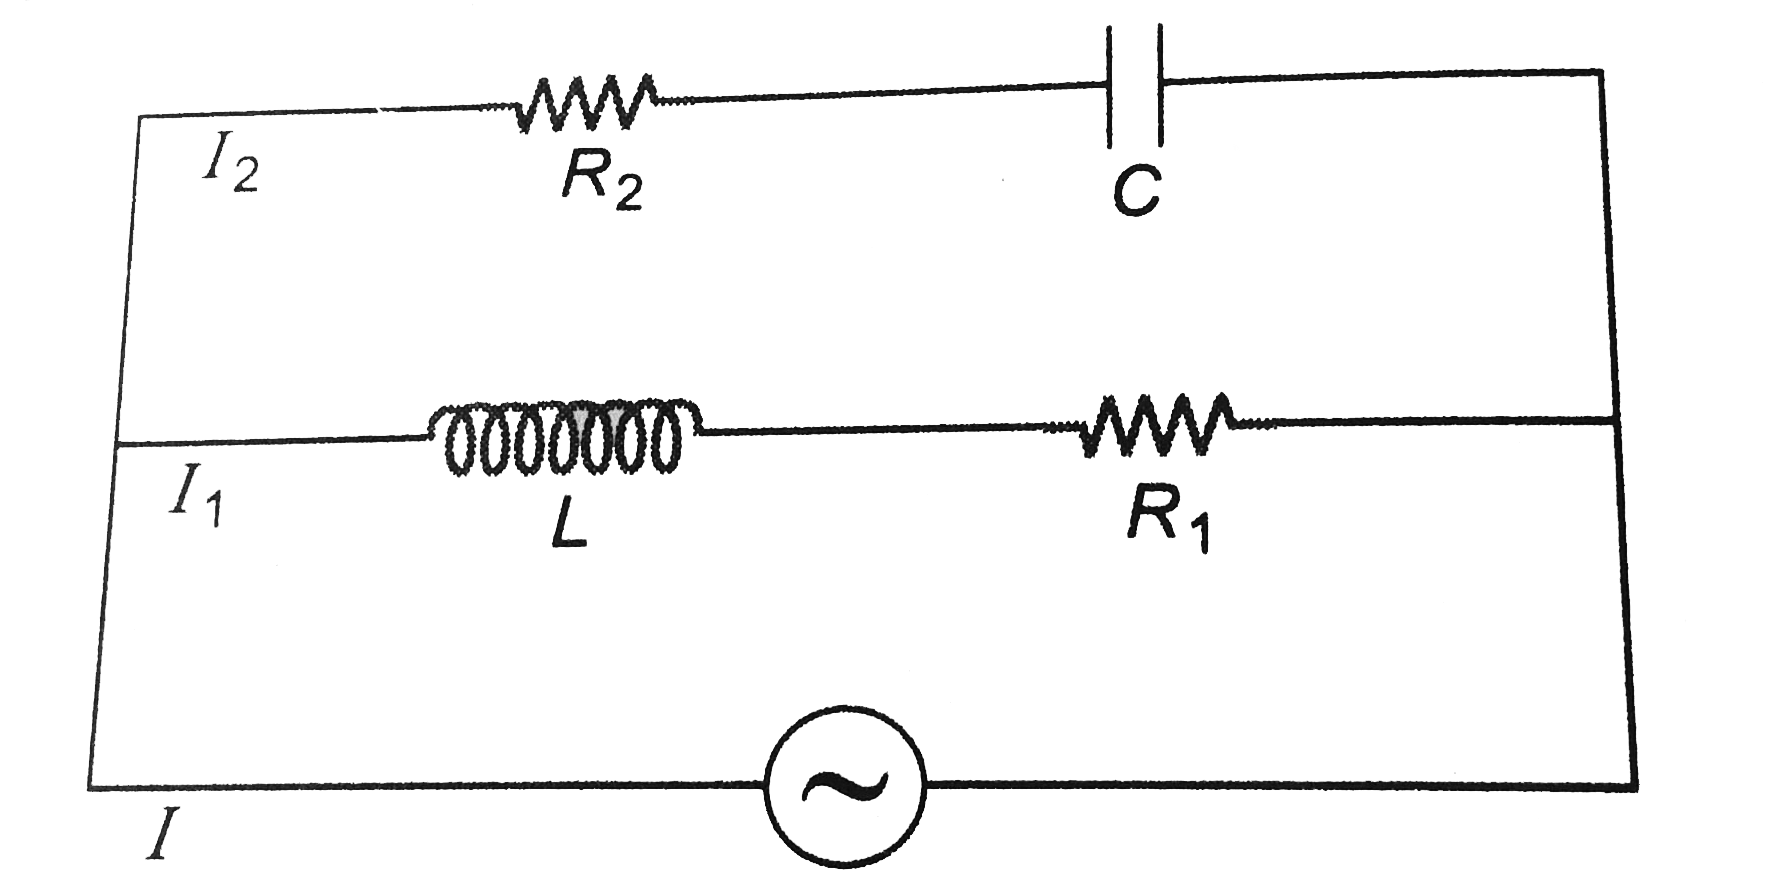 In the circuit shown in figure      R1=30Omega, R2=40 Omega, L=0.4H and C=1/3mF.   Find seven function of time I, I1, I2, V(R1), VL, V(R2) and VC. Also total power consumed in the circuit. In the given potential function V is in volts and omega rad//s V=200 sin(100t+30)